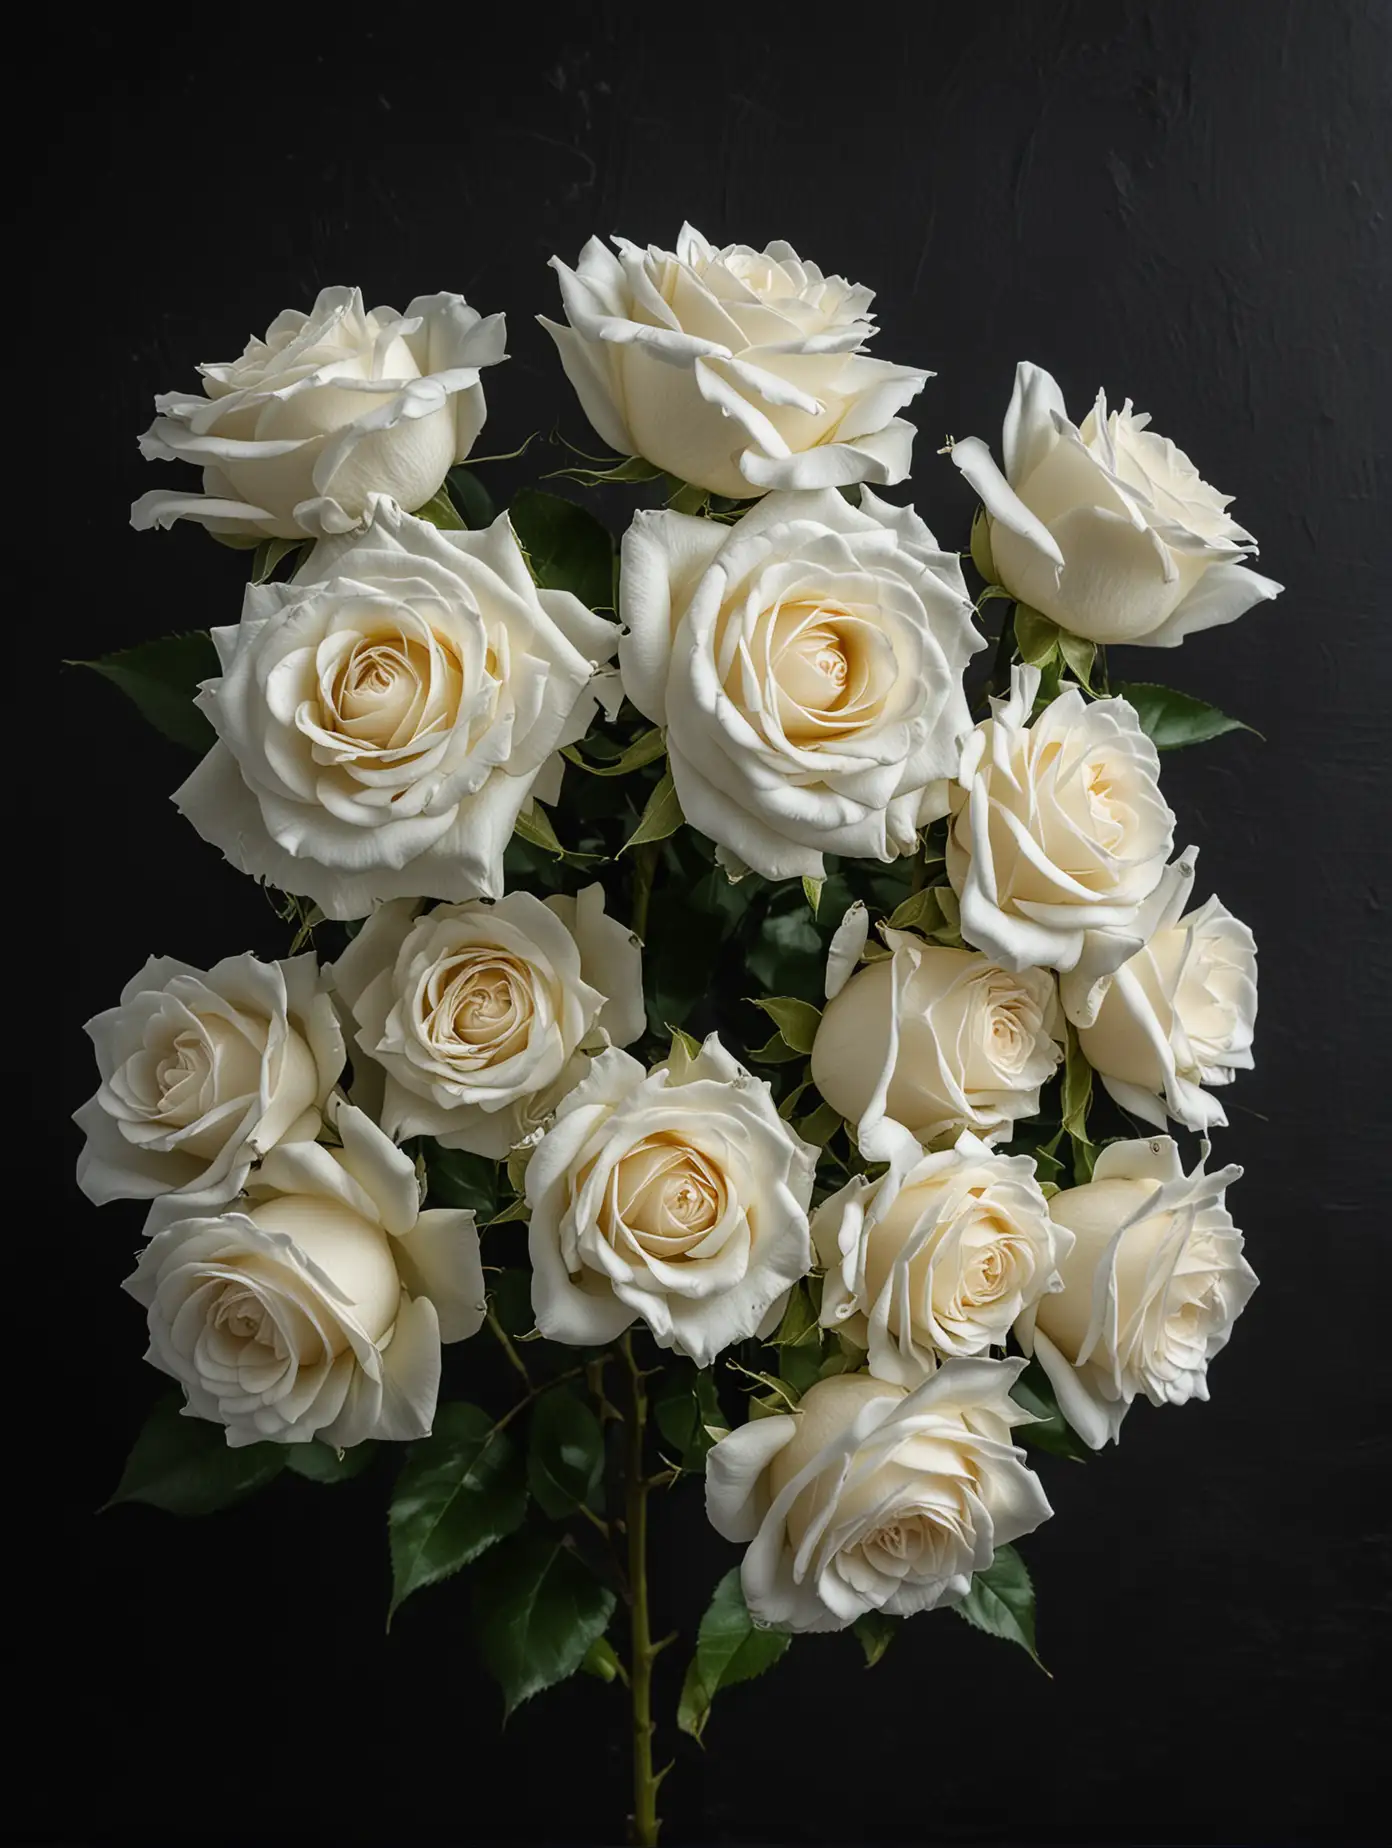 on black background lies several white roses, black solid background